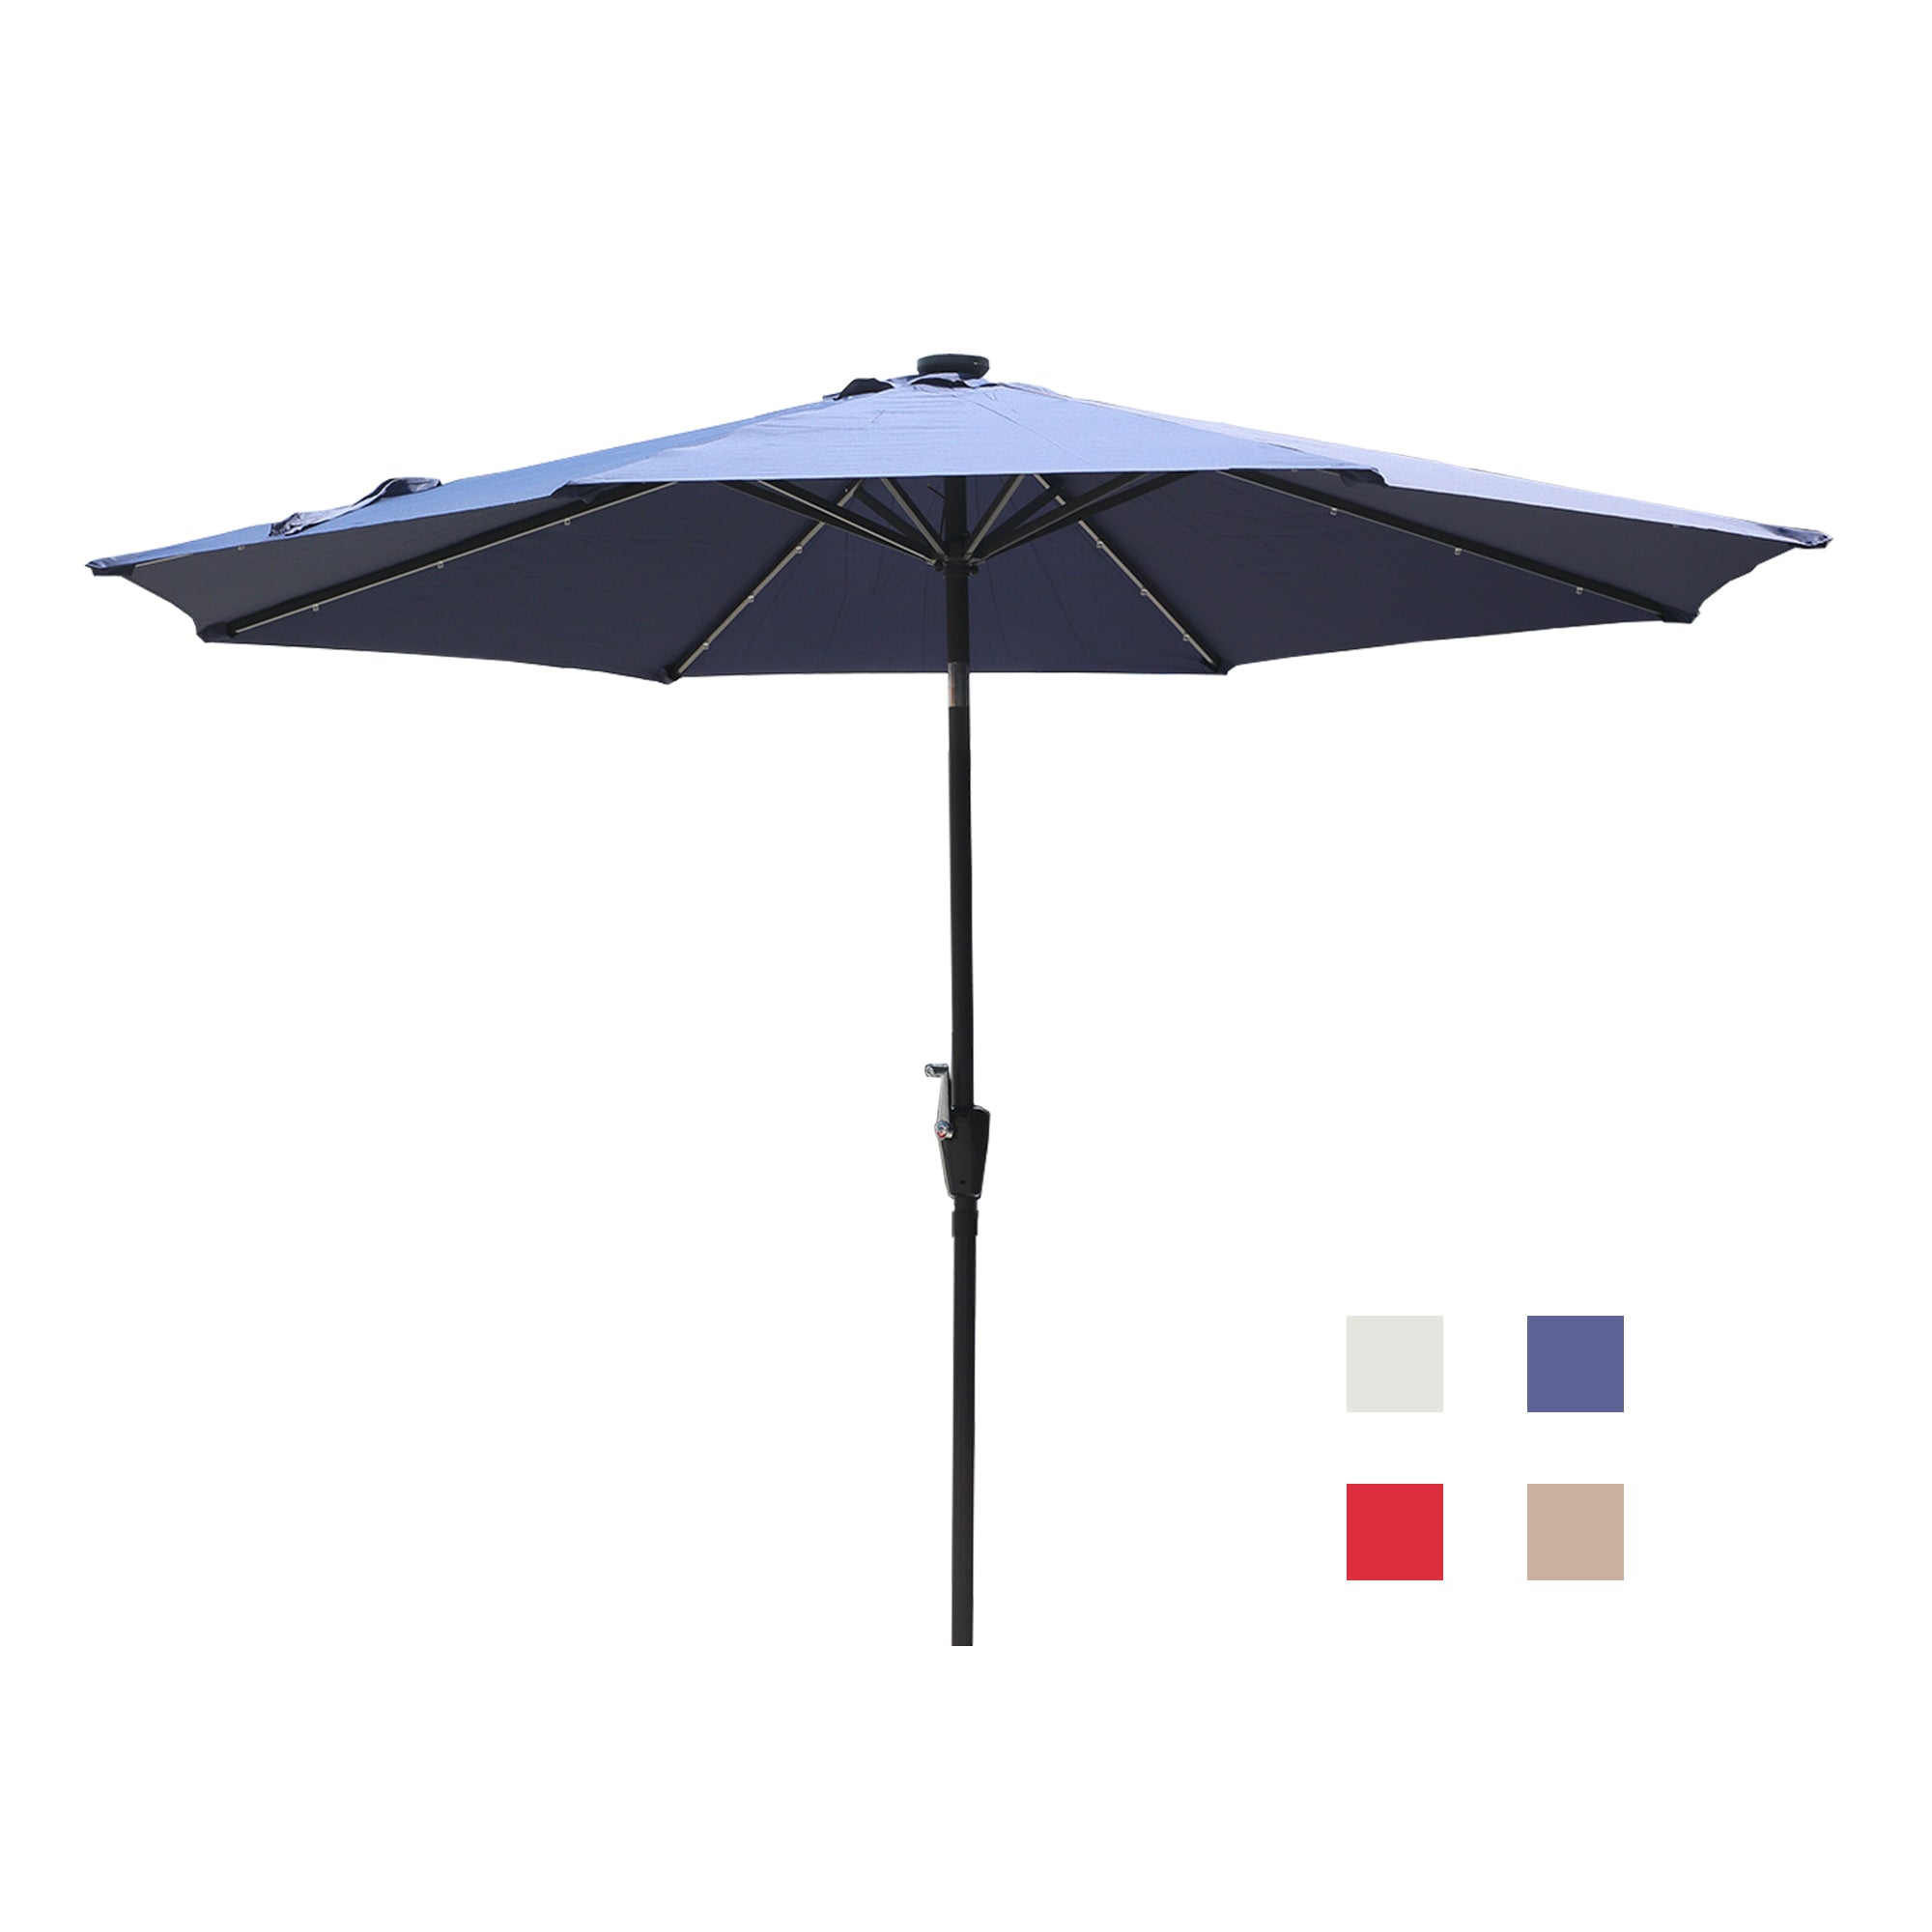 10-ft Patio Umbrella with LED Lights, Navy Blue/Beige/Red/Tan